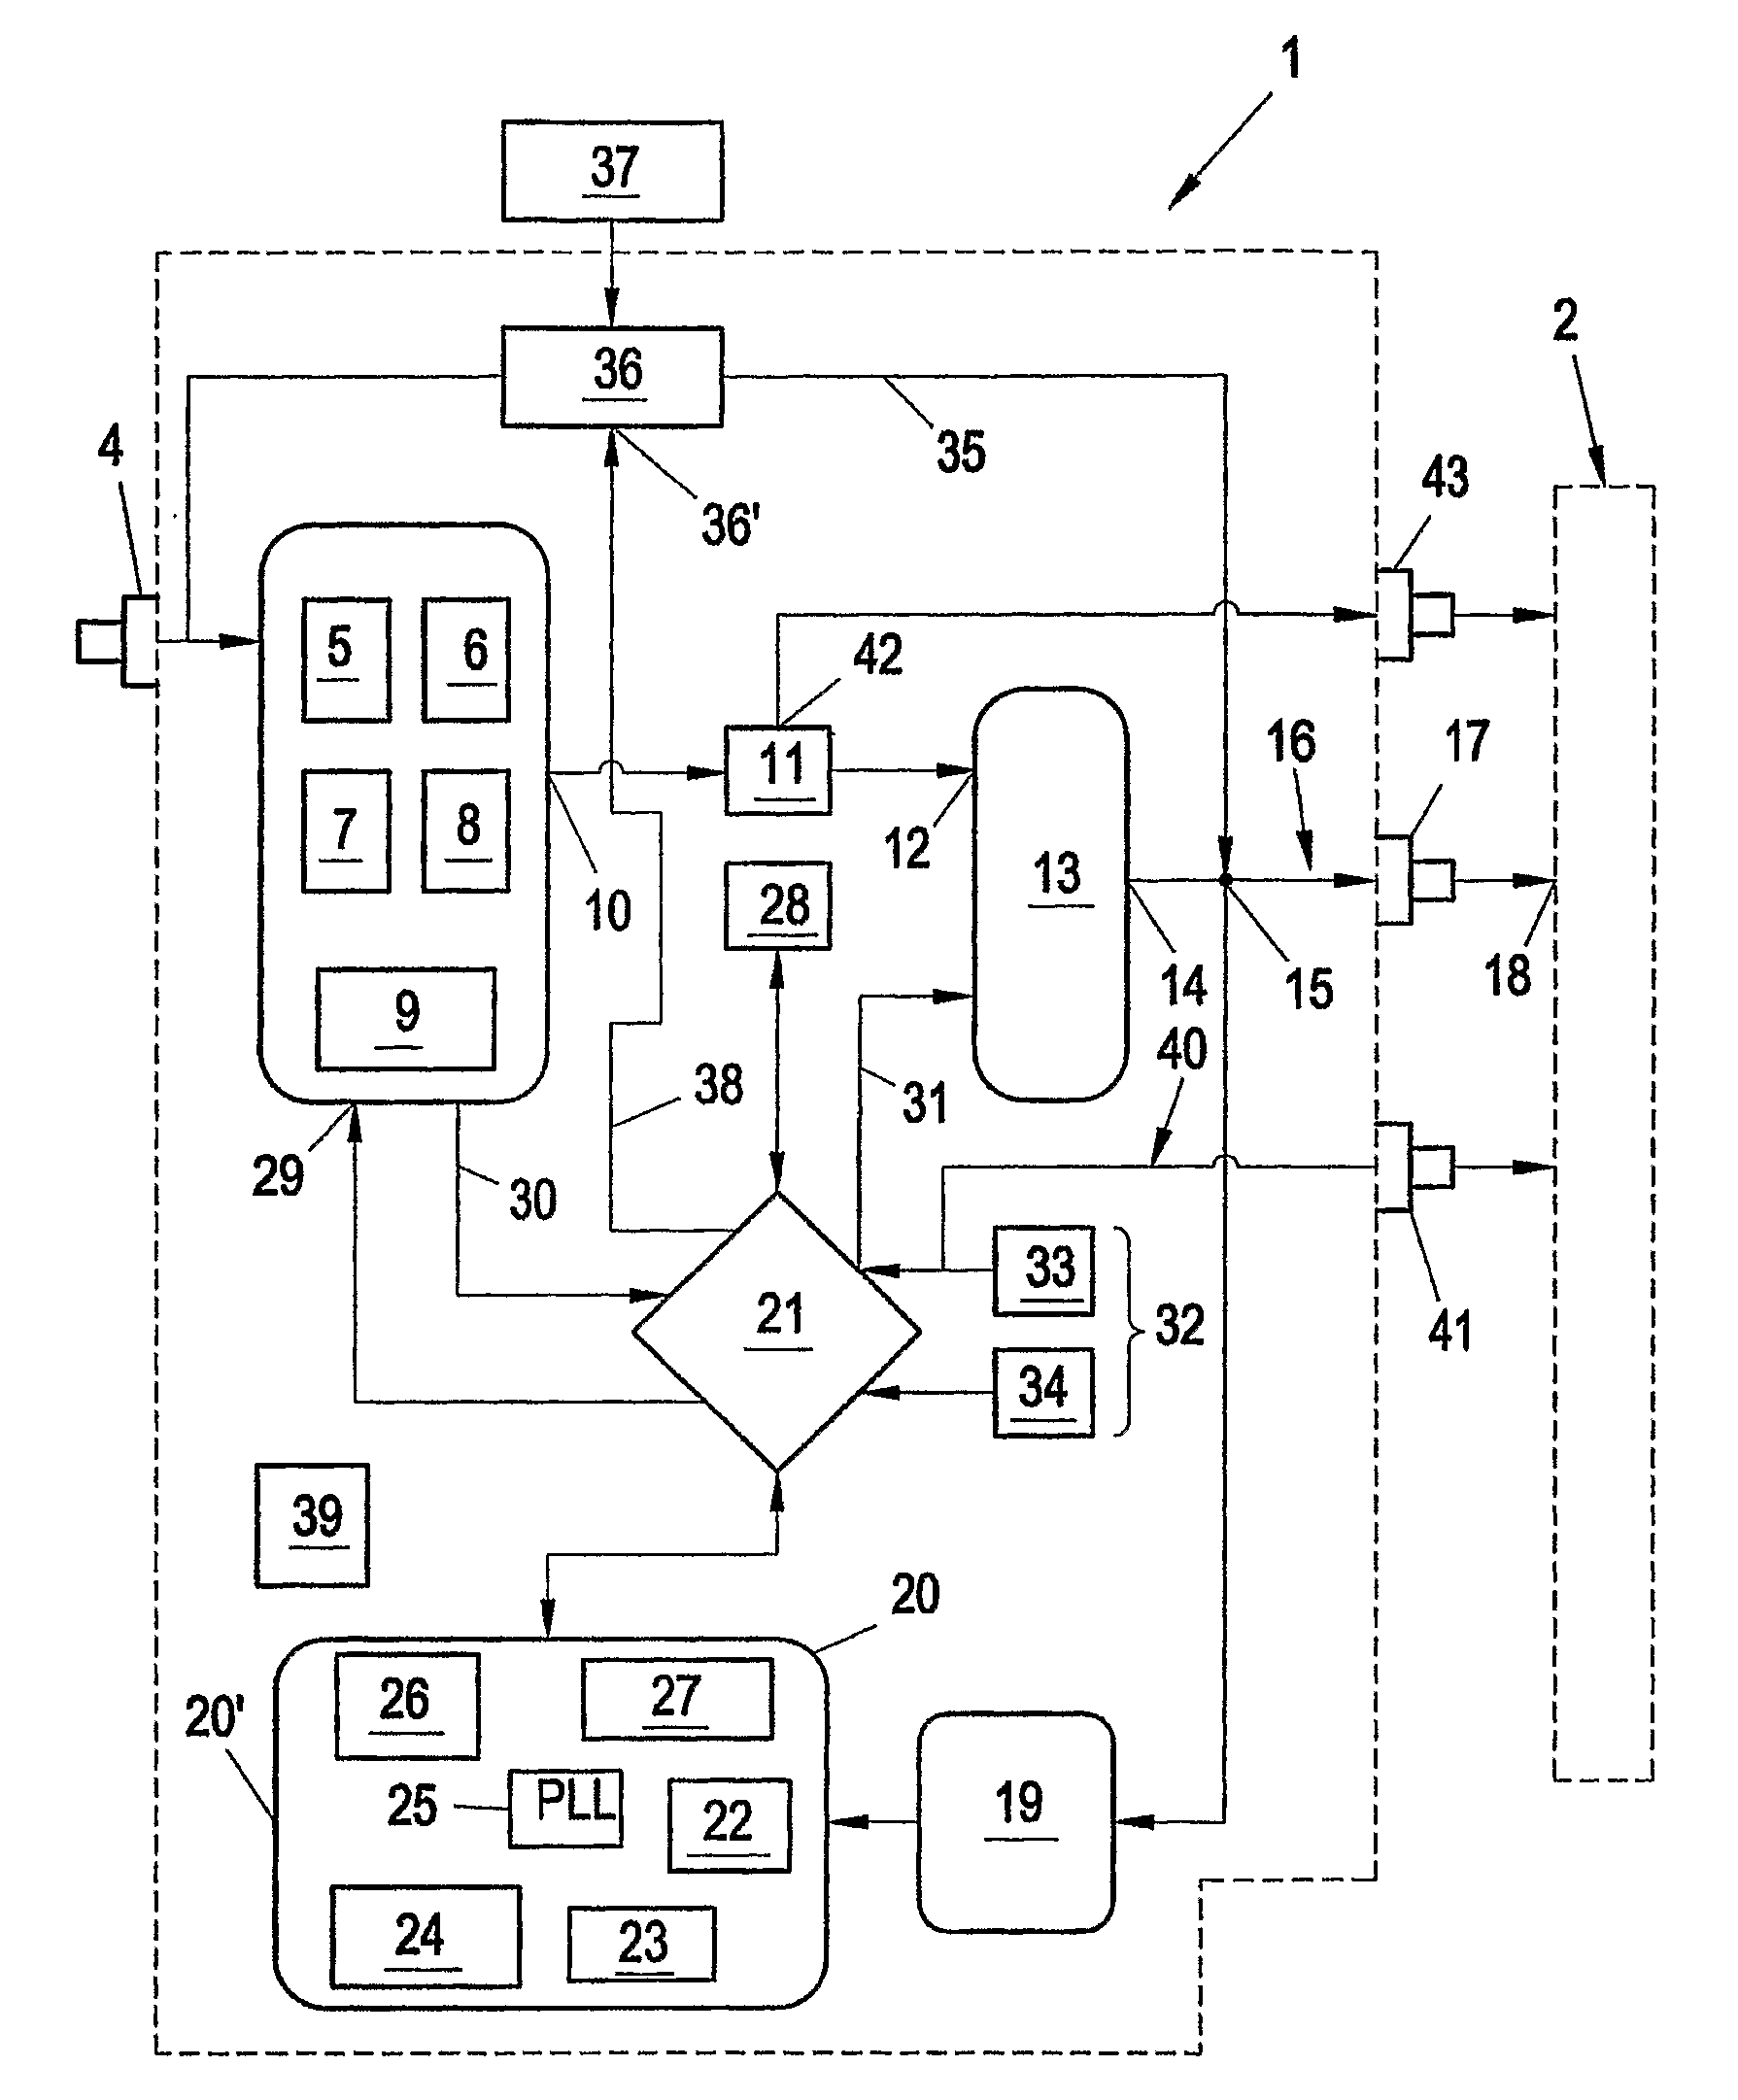 Appliance for Converting Digital Audio Broadcast (Dab) Signals